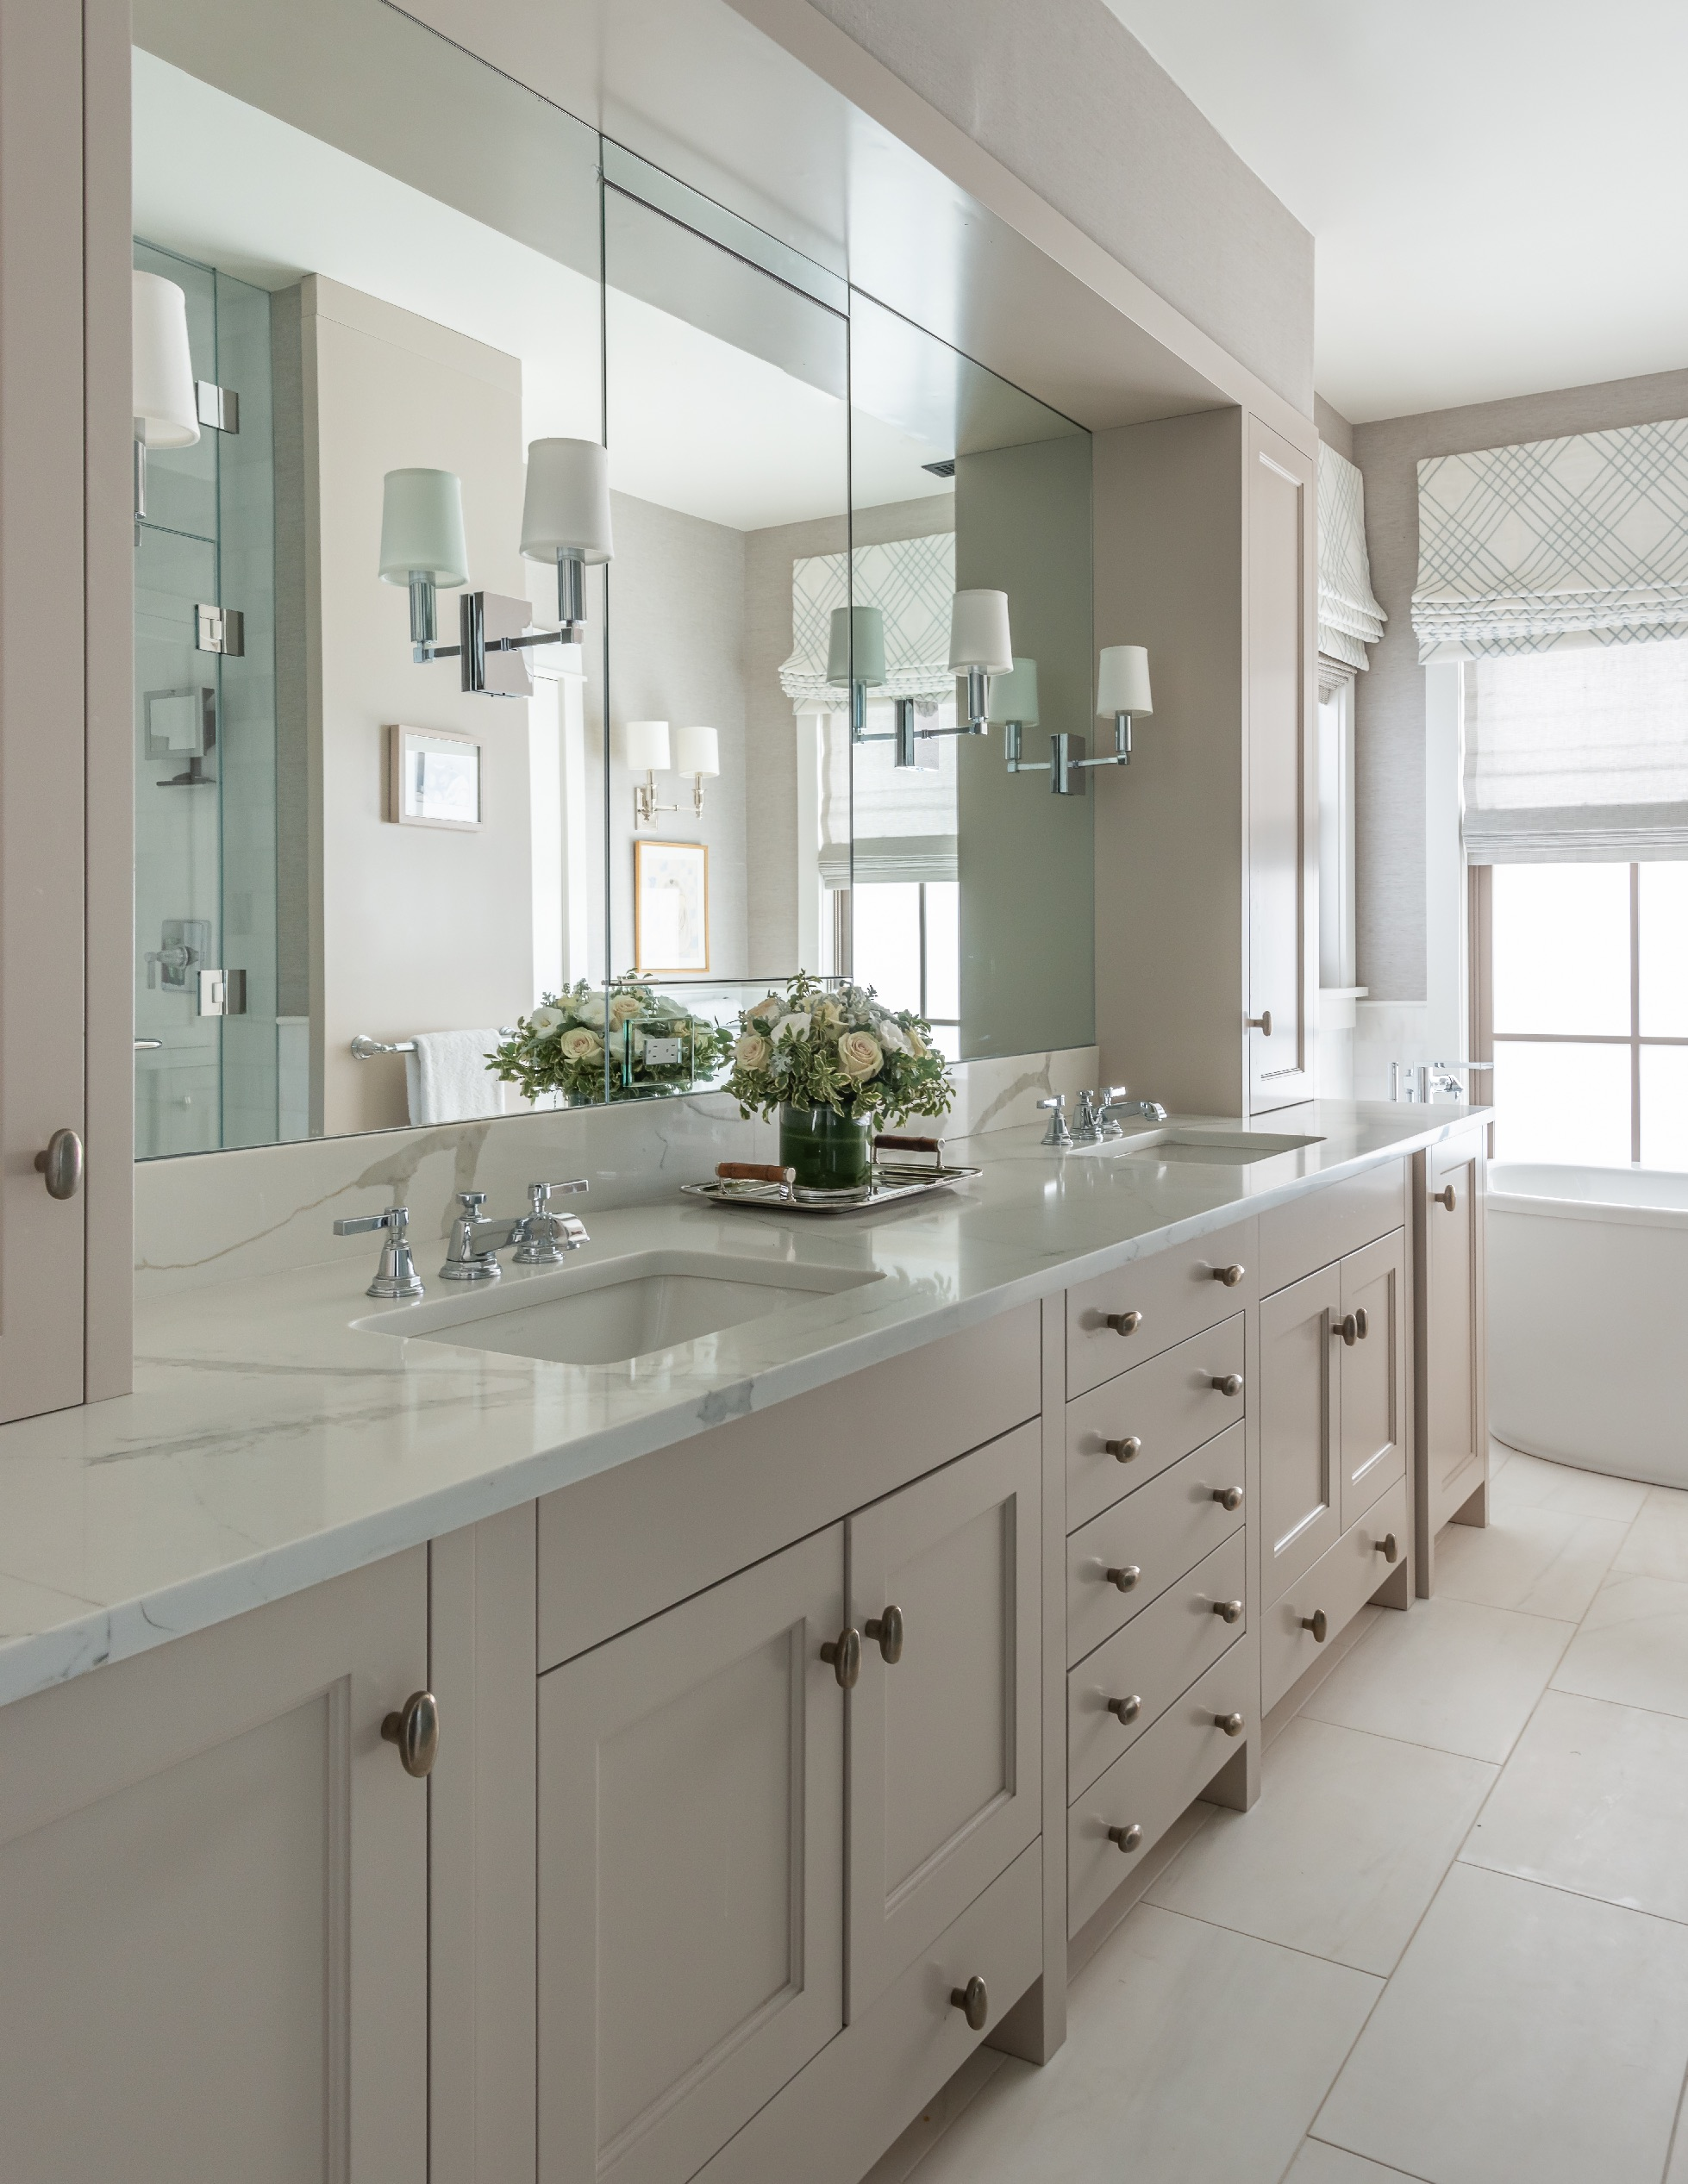  Contemporary Vacation Home Bathroom. Snedens Landing Residence by Alan Tanksley, Inc..